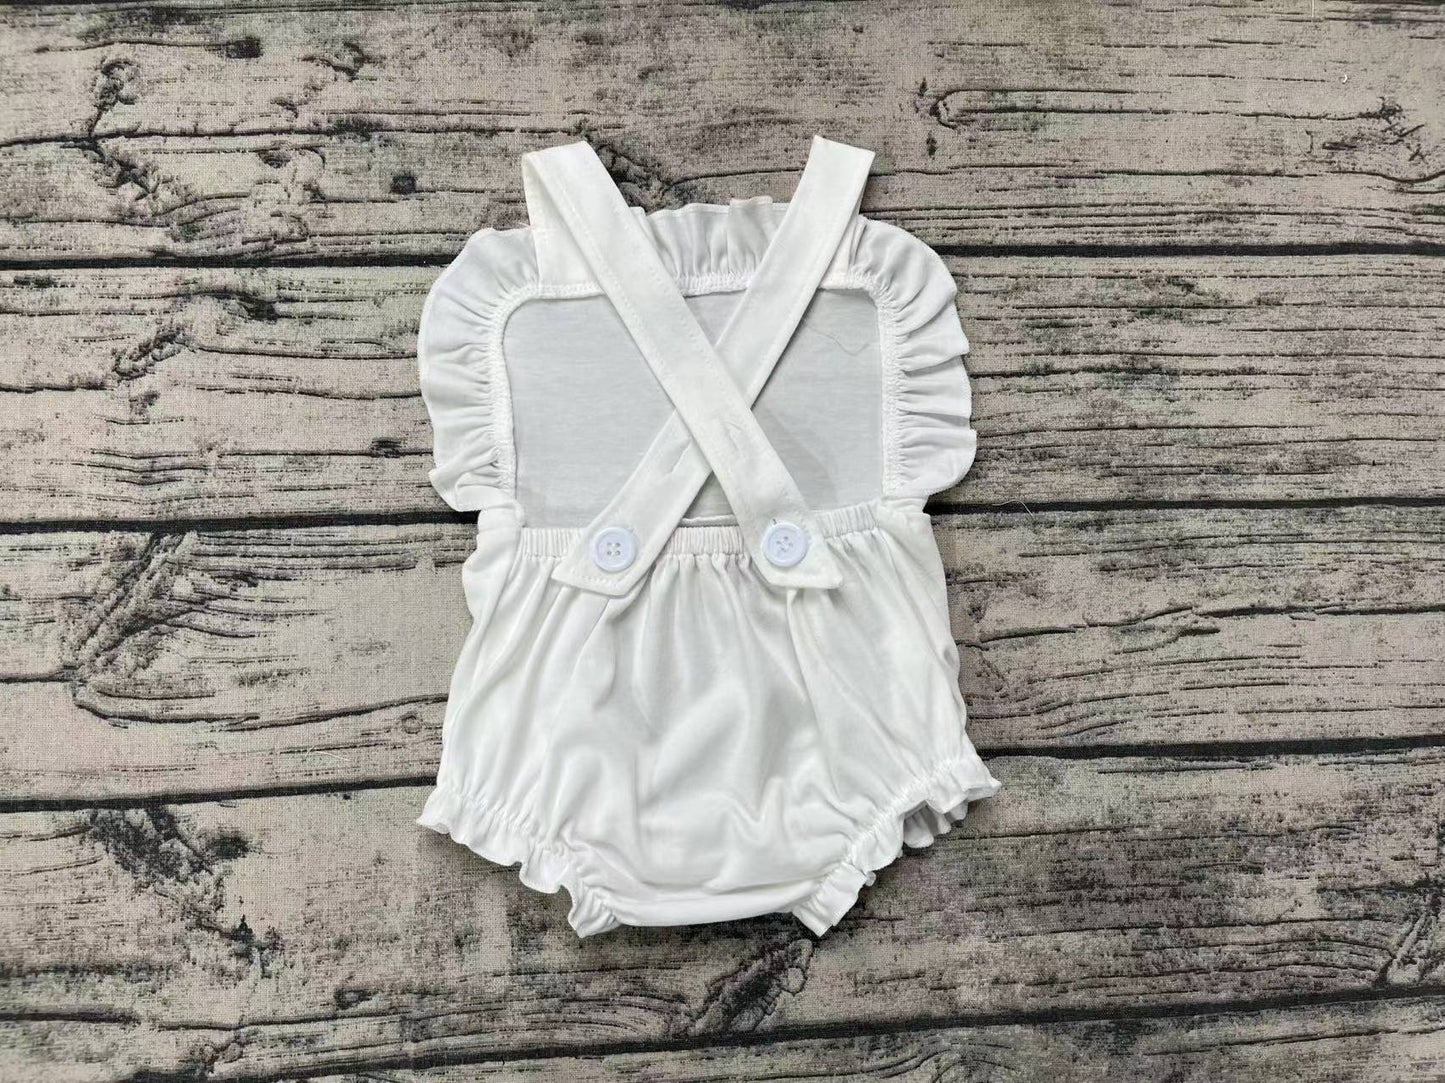 Baby Infant Girls Ruffle White Flag 4th of July Rompers preorder